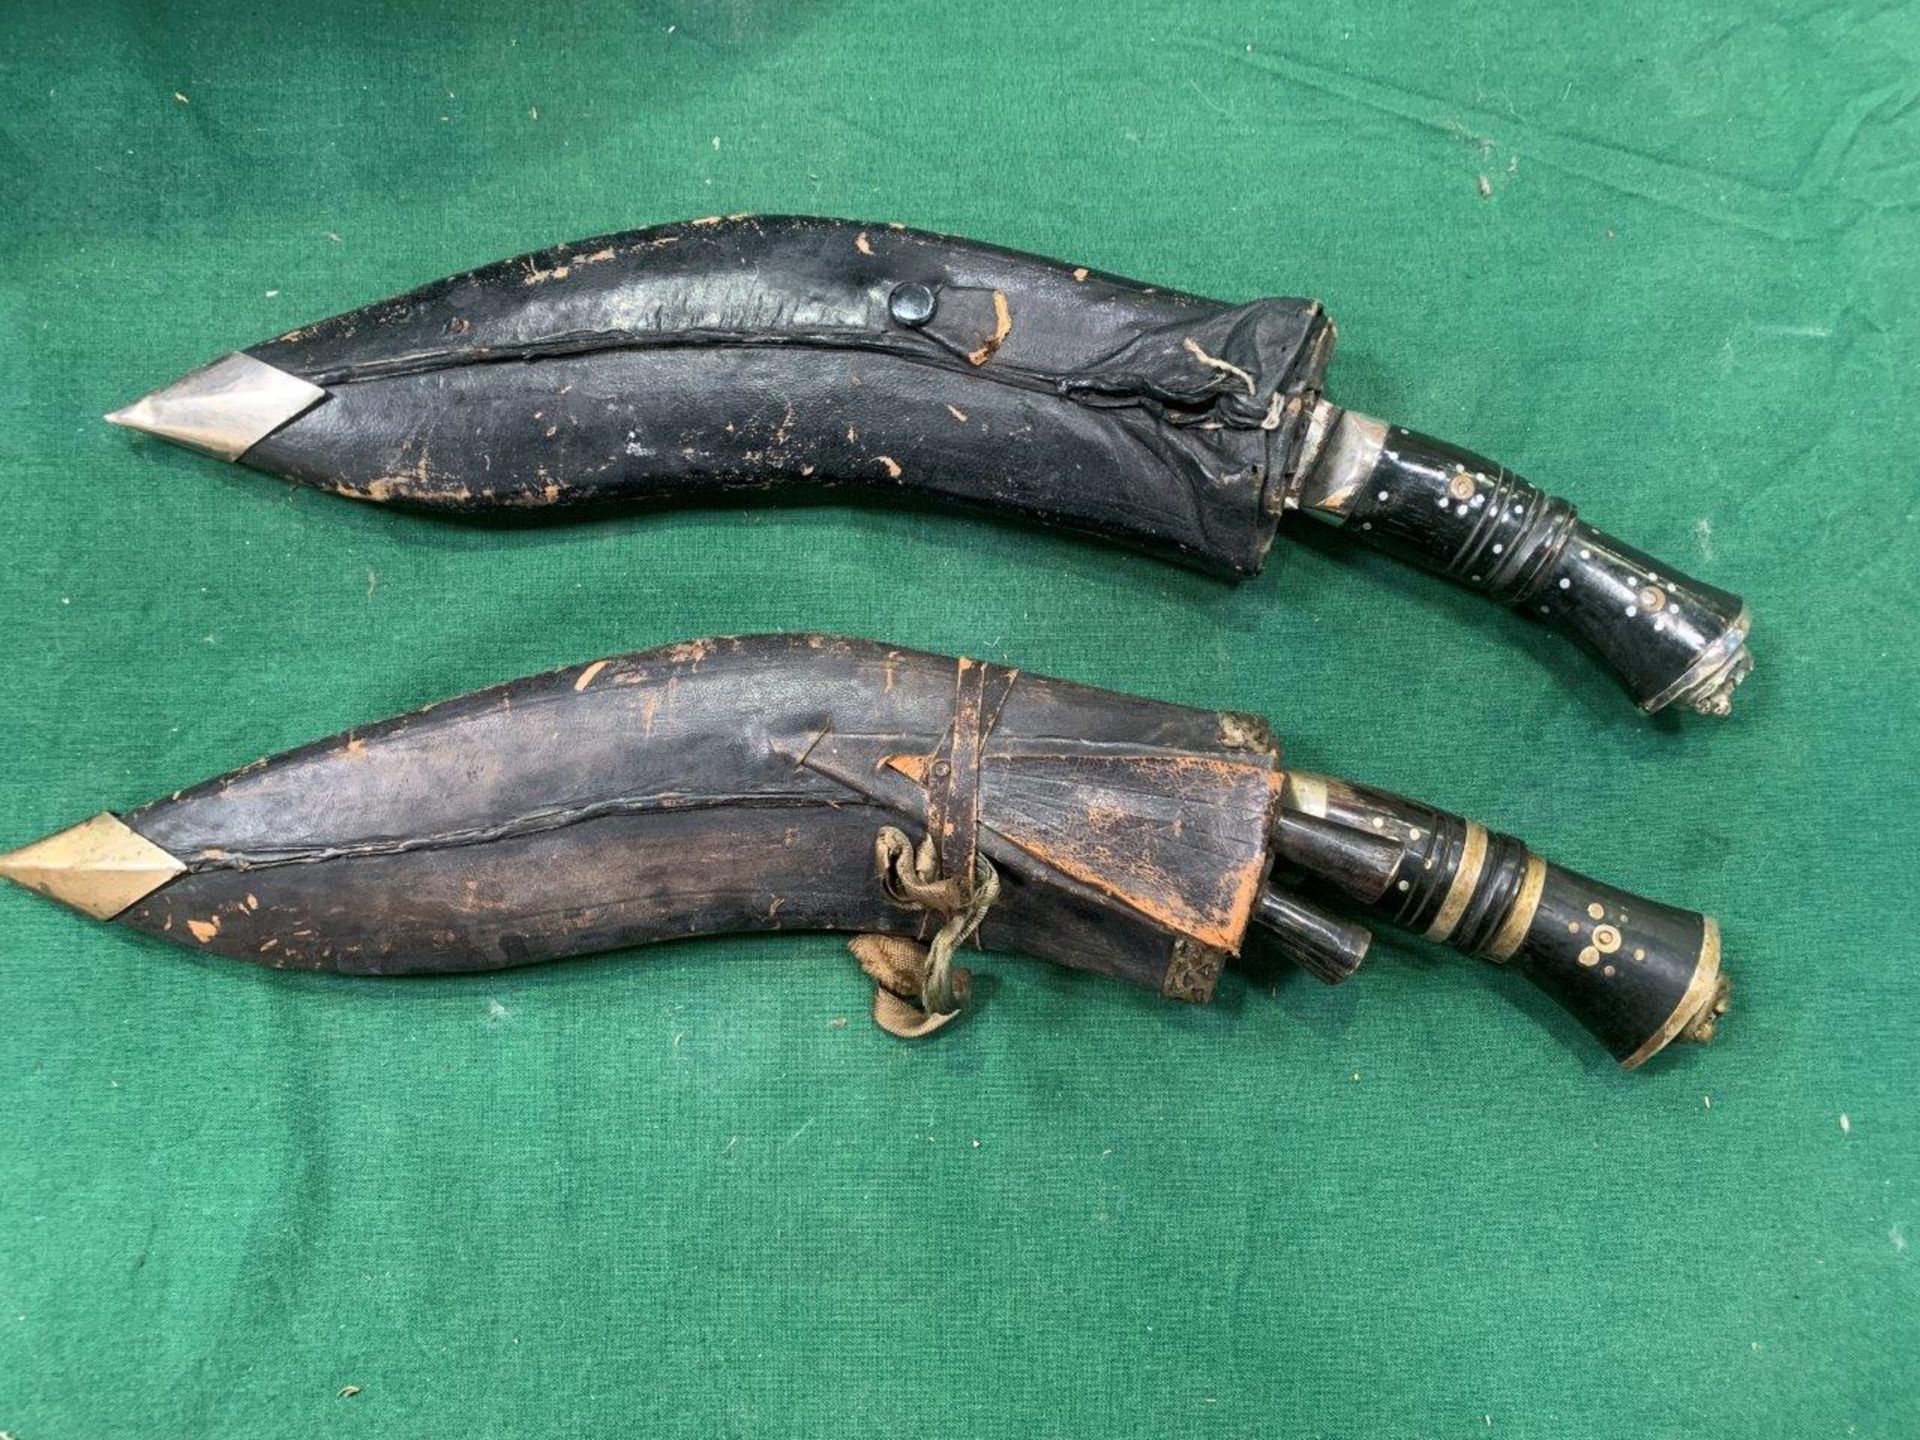 Two Kukri knives in leather and wood sheathes